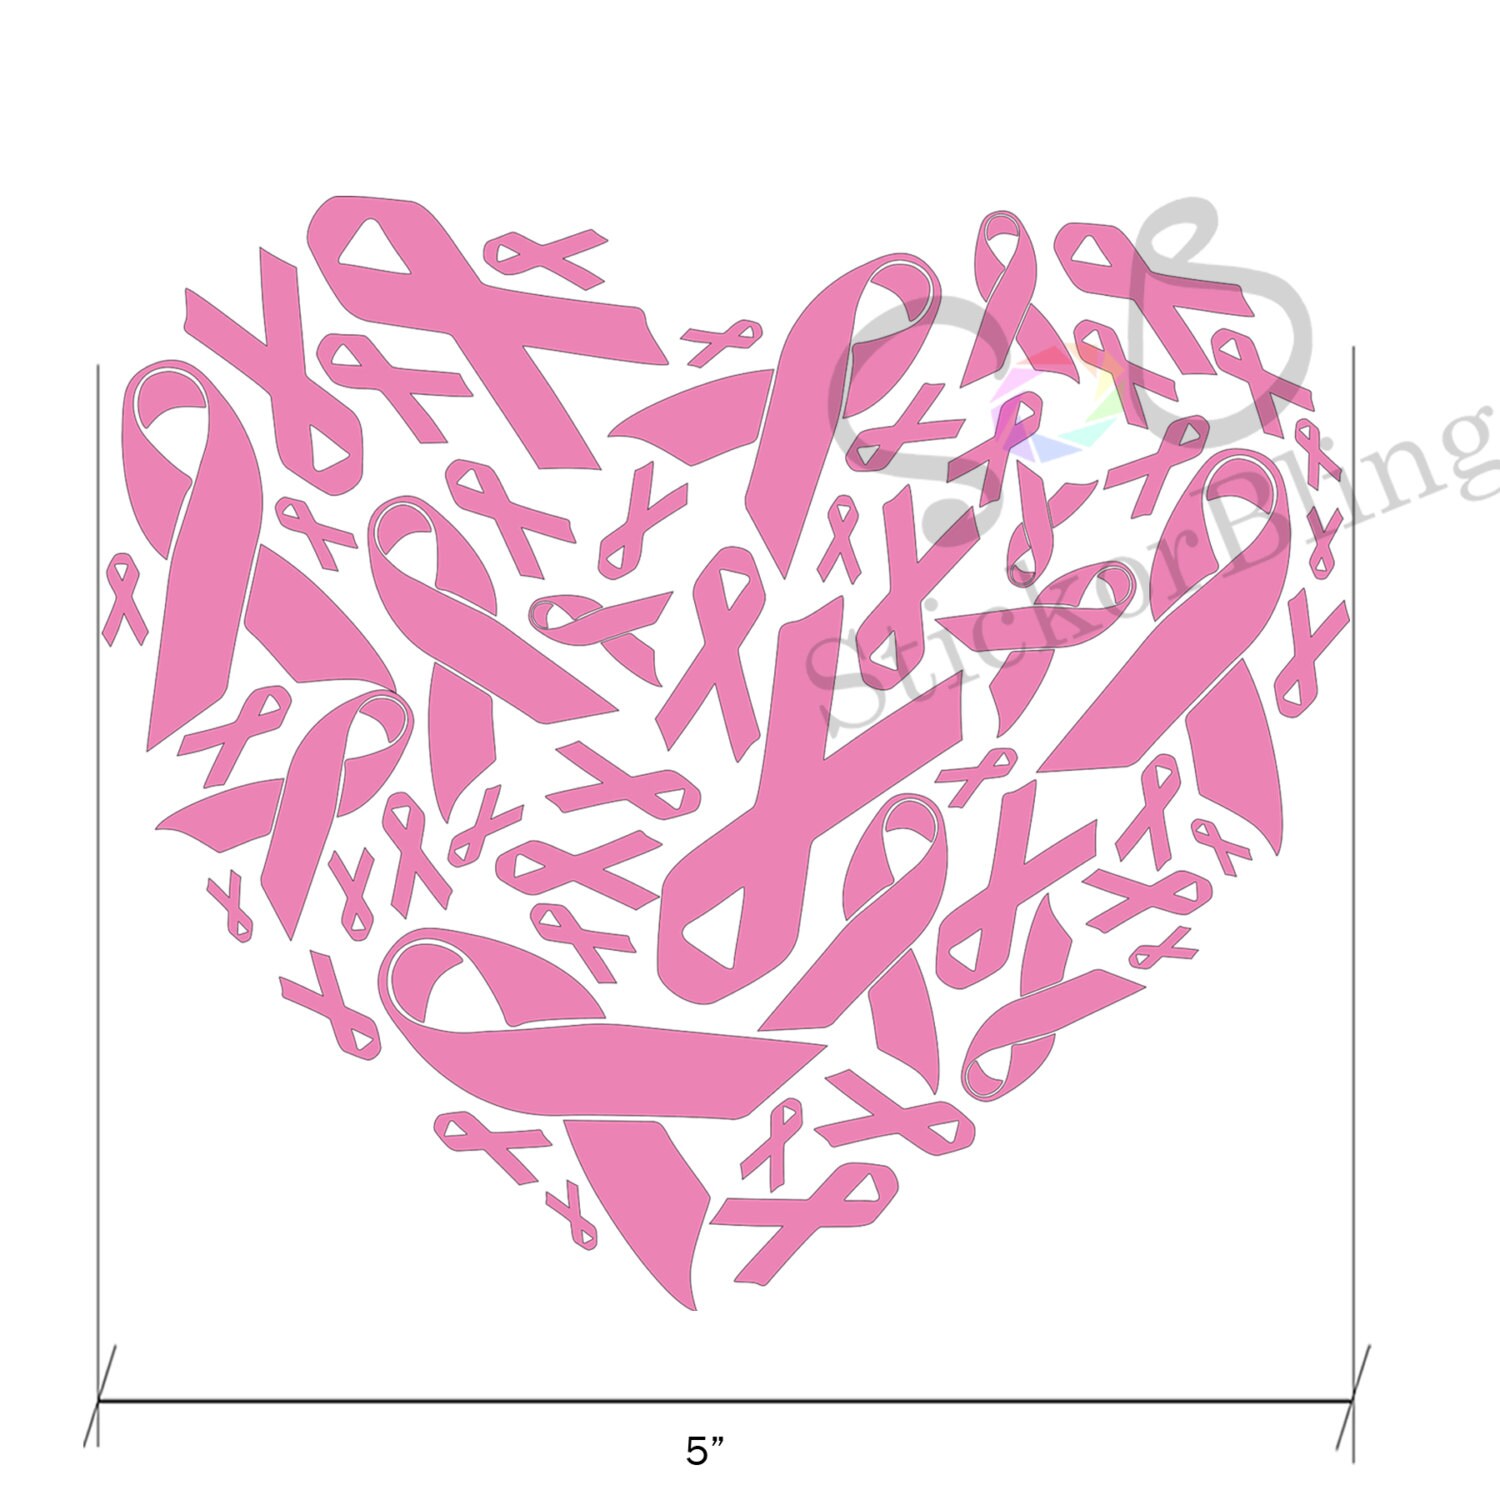 2 -2.25x4 Pink Ribbons for Breast Cancer Awareness-Laptop Tablet